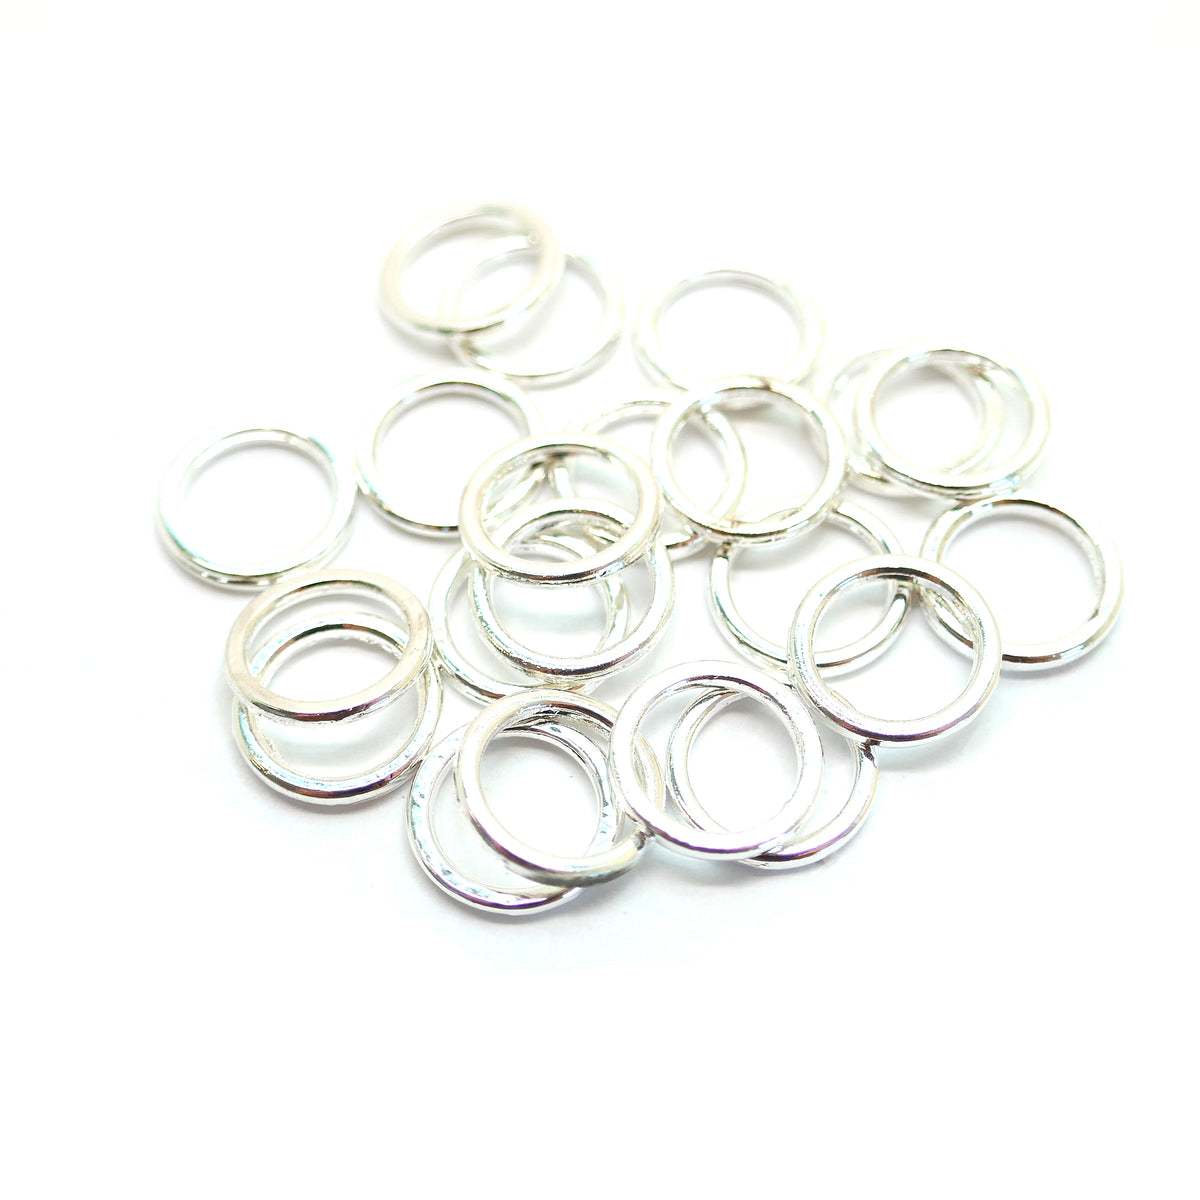 Open Jump Rings, 8mm Colorful O-Ring Connectors for DIY Crafts, Carbon Steel, Blue 24pcs, Women's, Size: Small